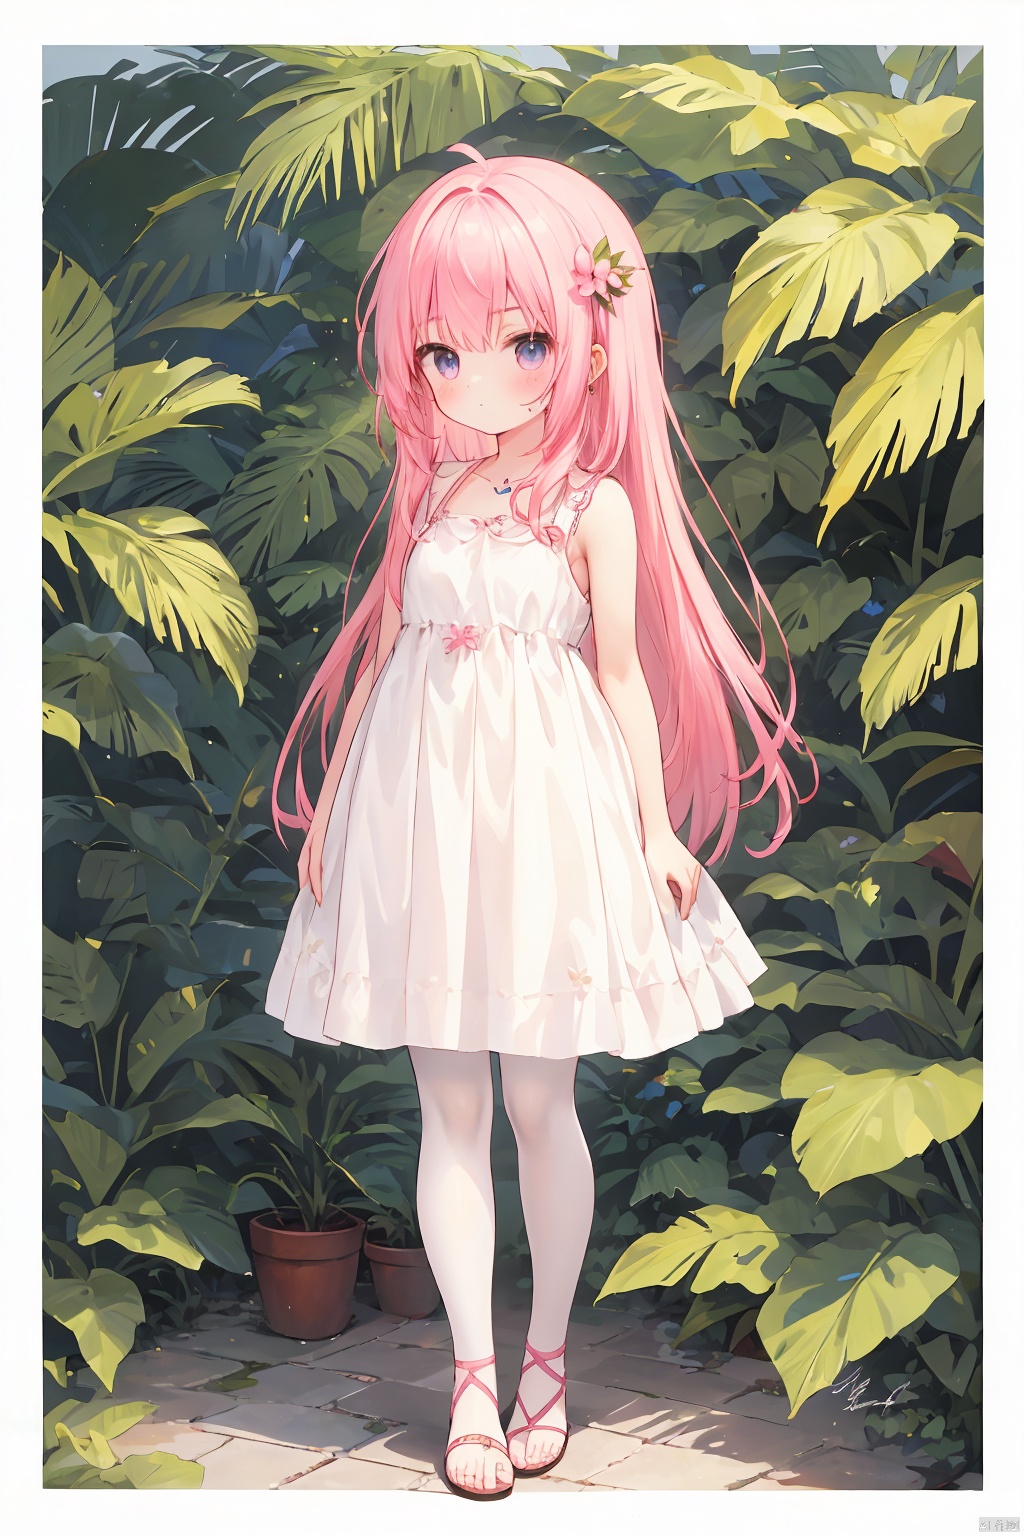  1girl, artist_name, bangs, bare_arms, bird, dress, flower, full_body, jewelry, leaf, long_hair, pink_hair, plant, sandals, signature, , white pantyhose